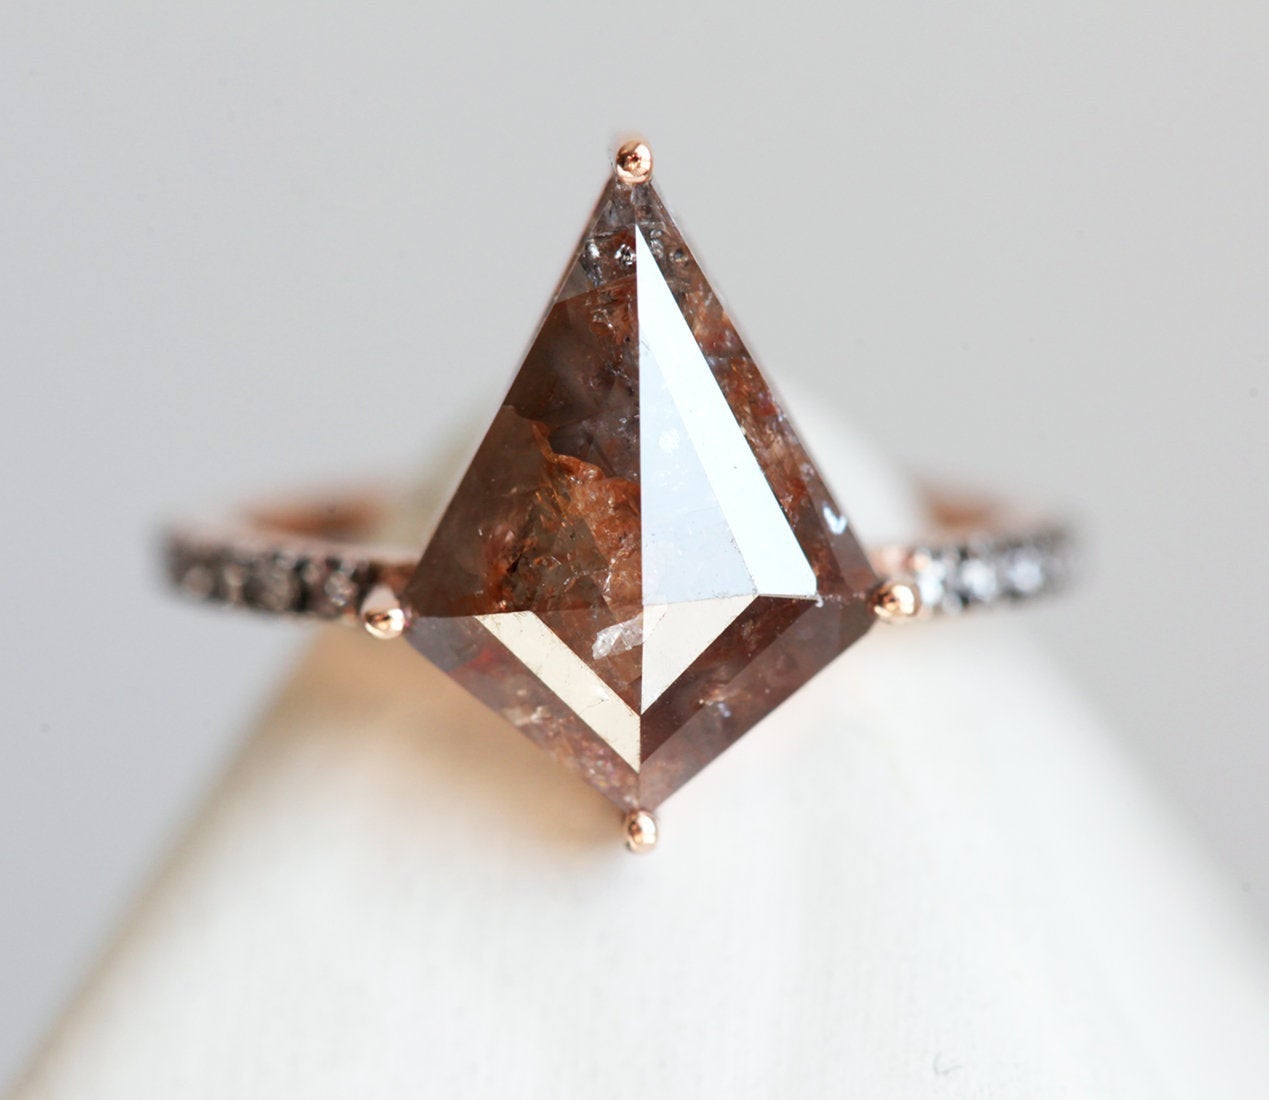 Brownish Red Kite Salt & Pepper Diamond Ring with Side Round White Diamonds on the Band